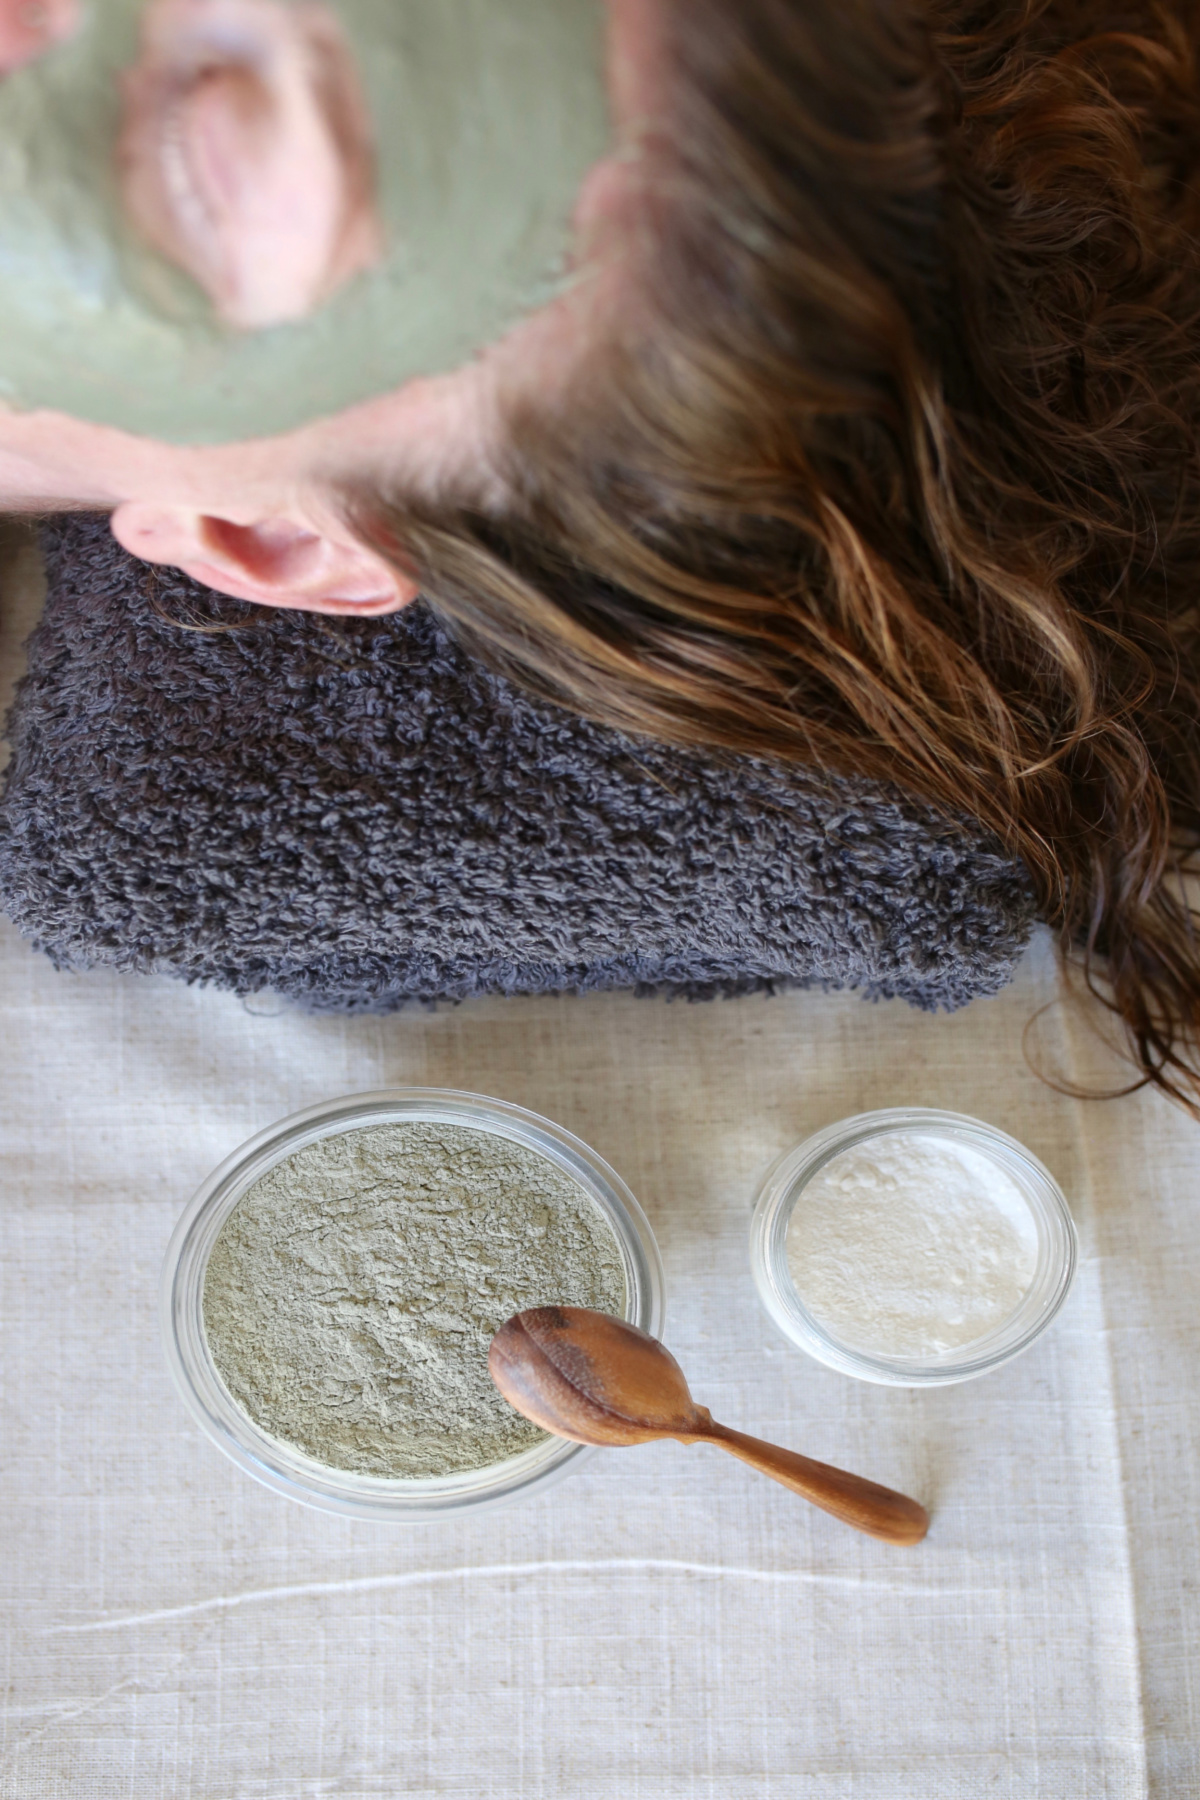 Ingredients for a clay face mask